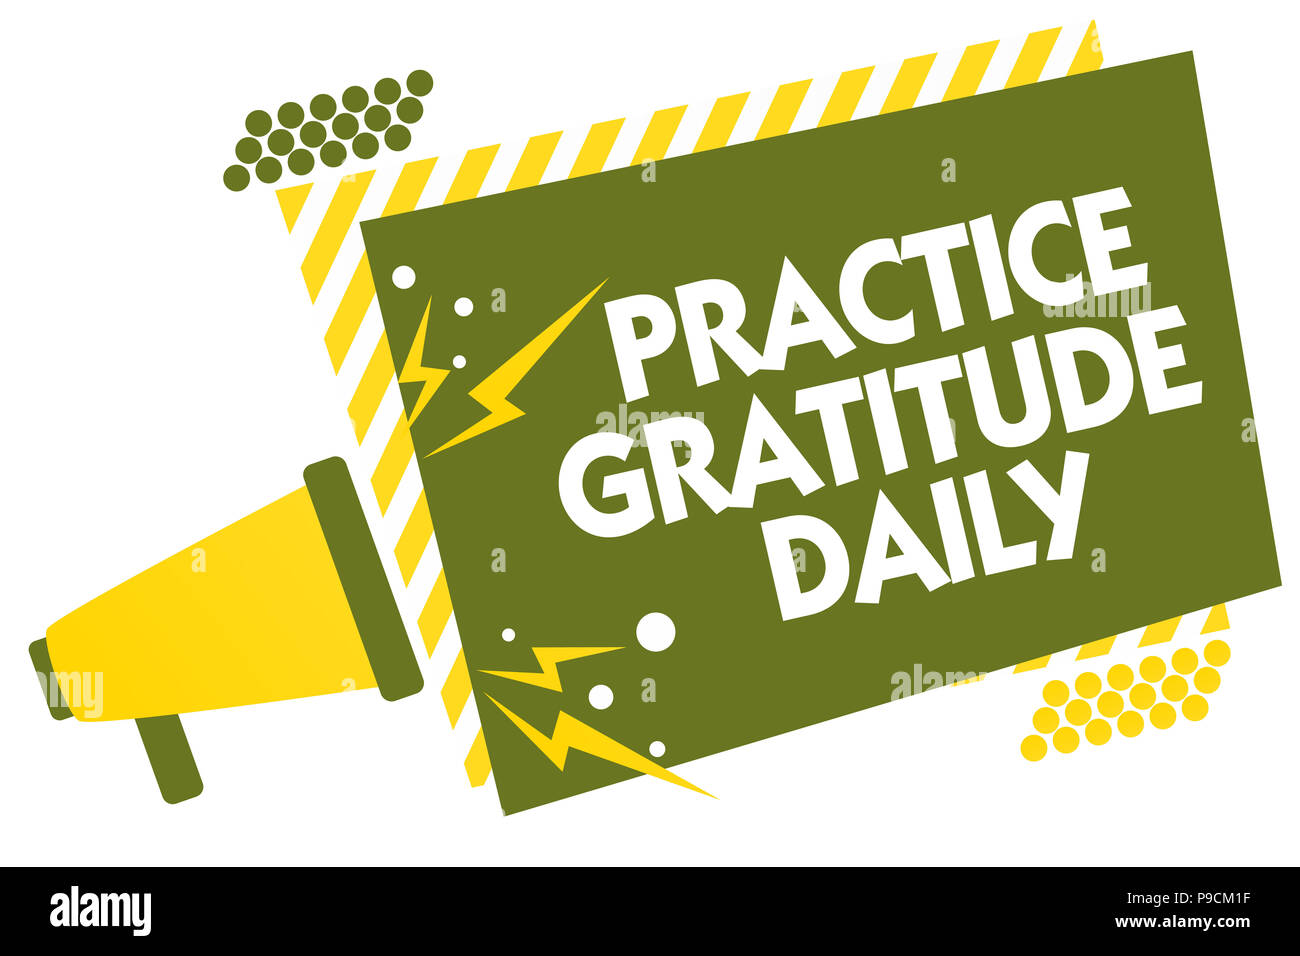 Writing note showing Practice Gratitude Daily. Business photo showcasing be grateful to those who helped encouarged you Megaphone loudspeaker yellow s Stock Photo